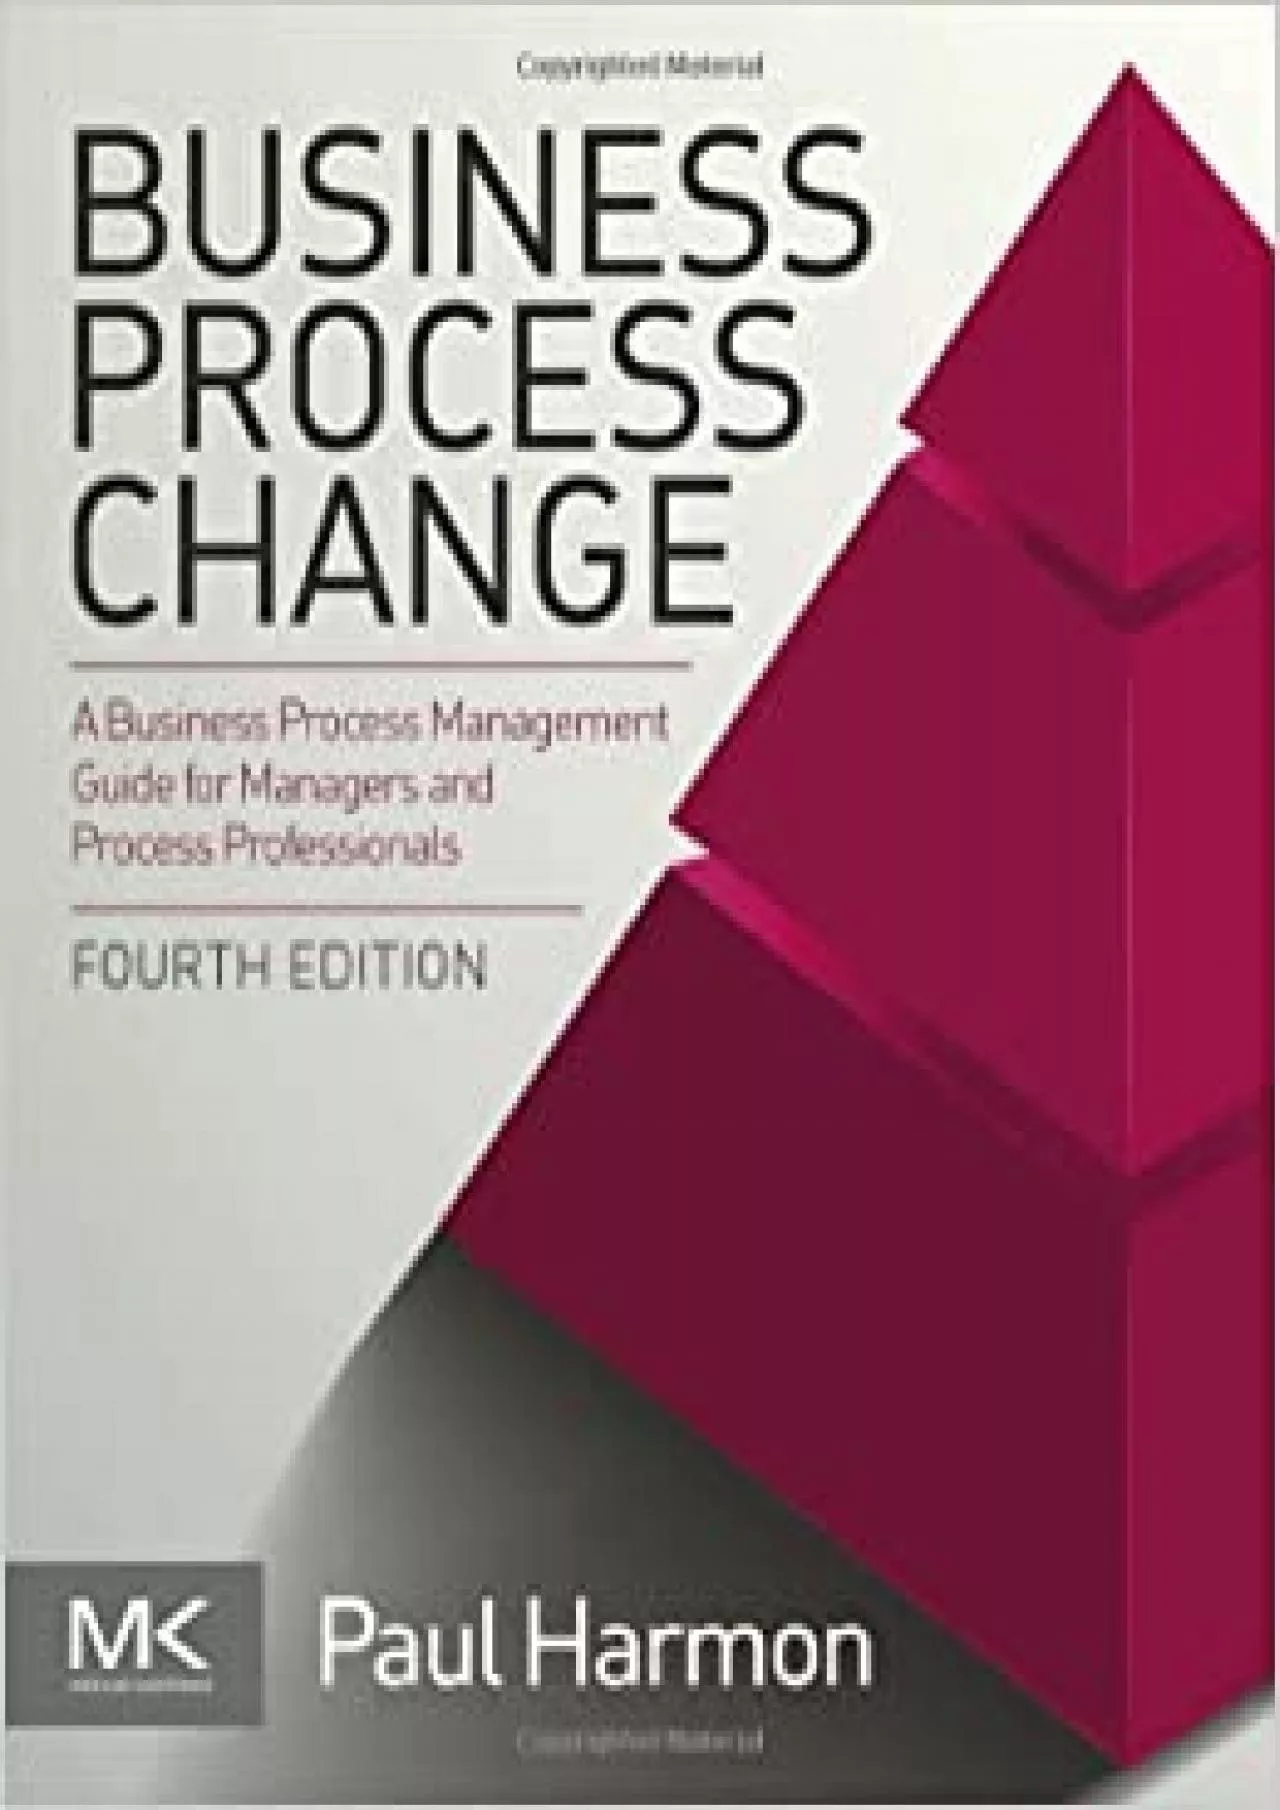 Business Process Change: A Business Process Management Guide for Managers and Process